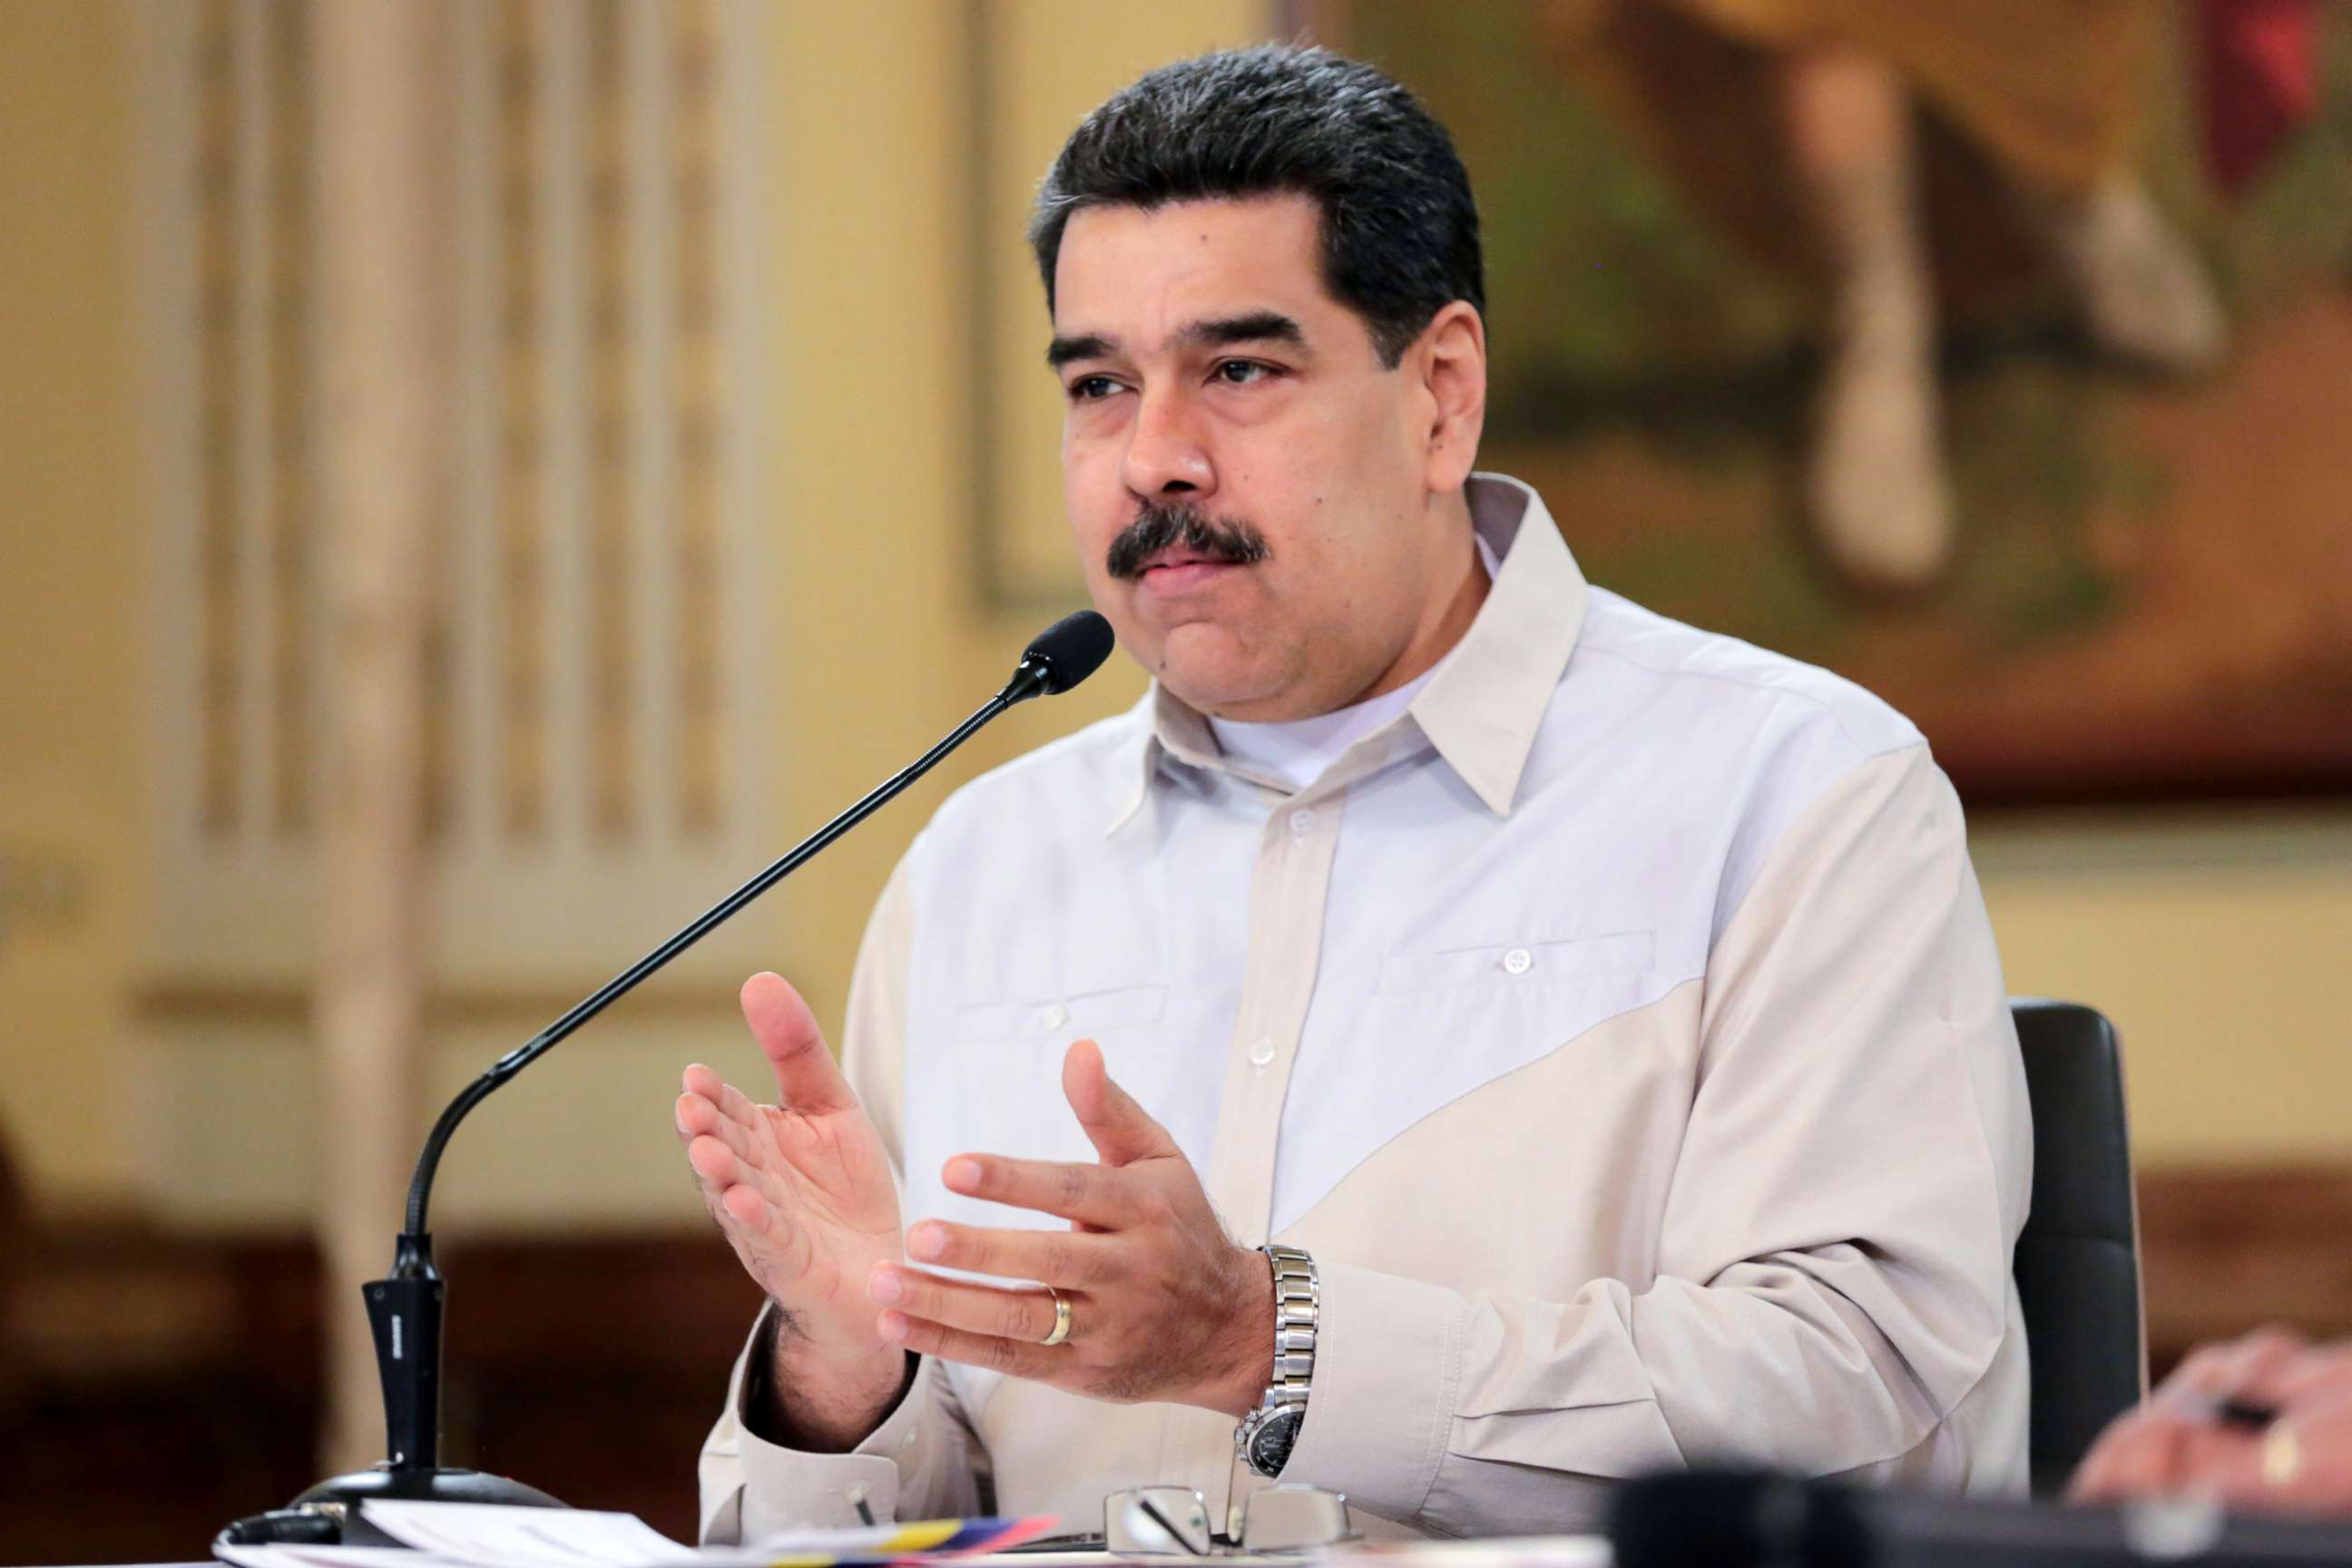 PHOTO: Venezuela's President Nicolas Maduro speaks during a meeting with members of the government at the Miraflores Palace Caracas, Venezuela, April 23, 2019.